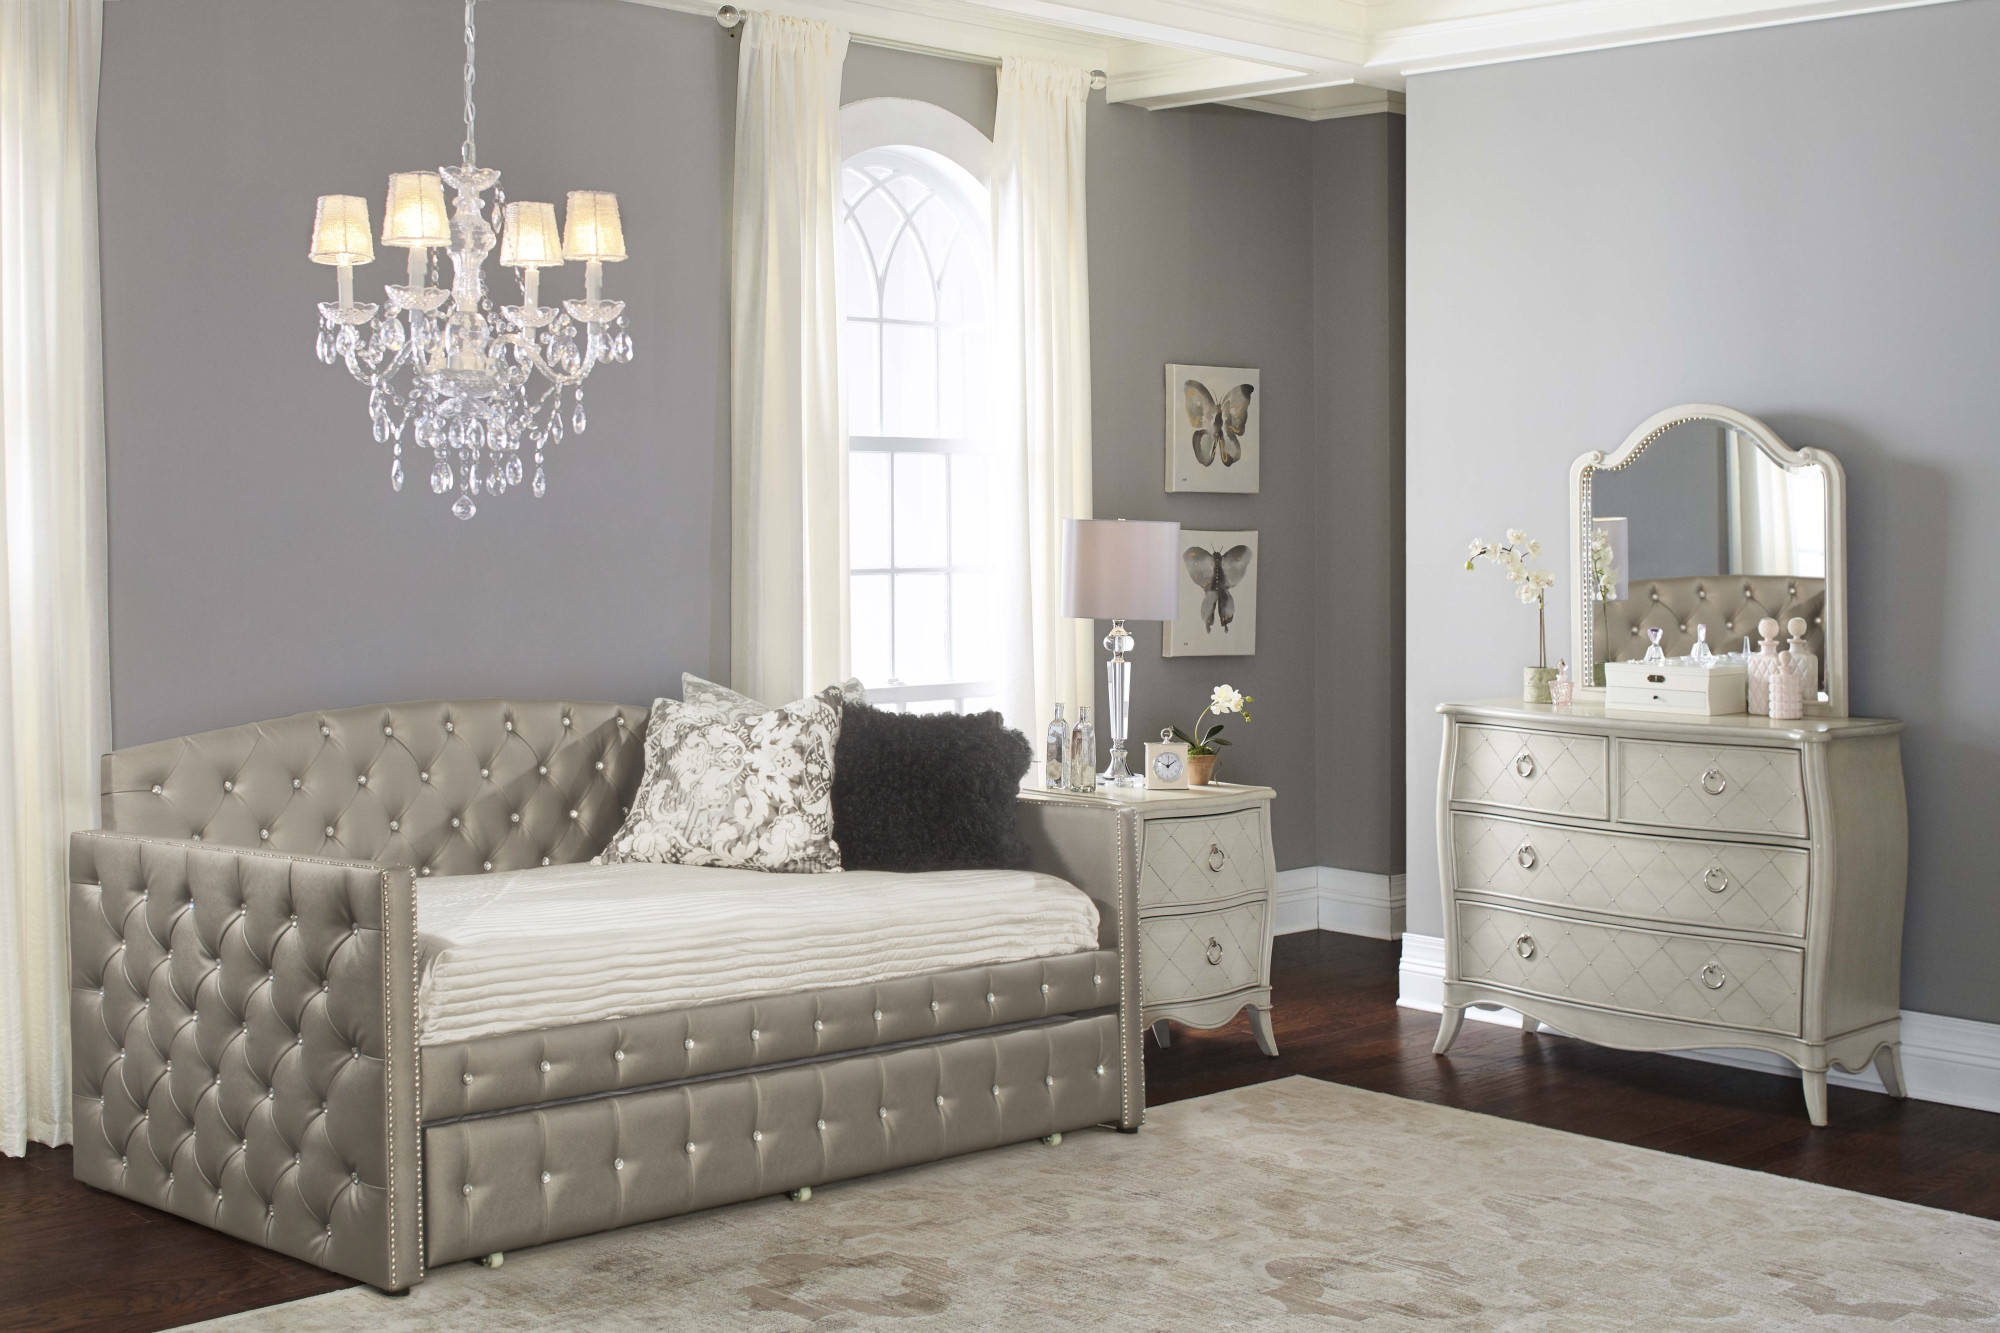 Hillsdale Furniture Memphis Upholstered Twin Daybed with Trundle, Pewter - image 1 of 5